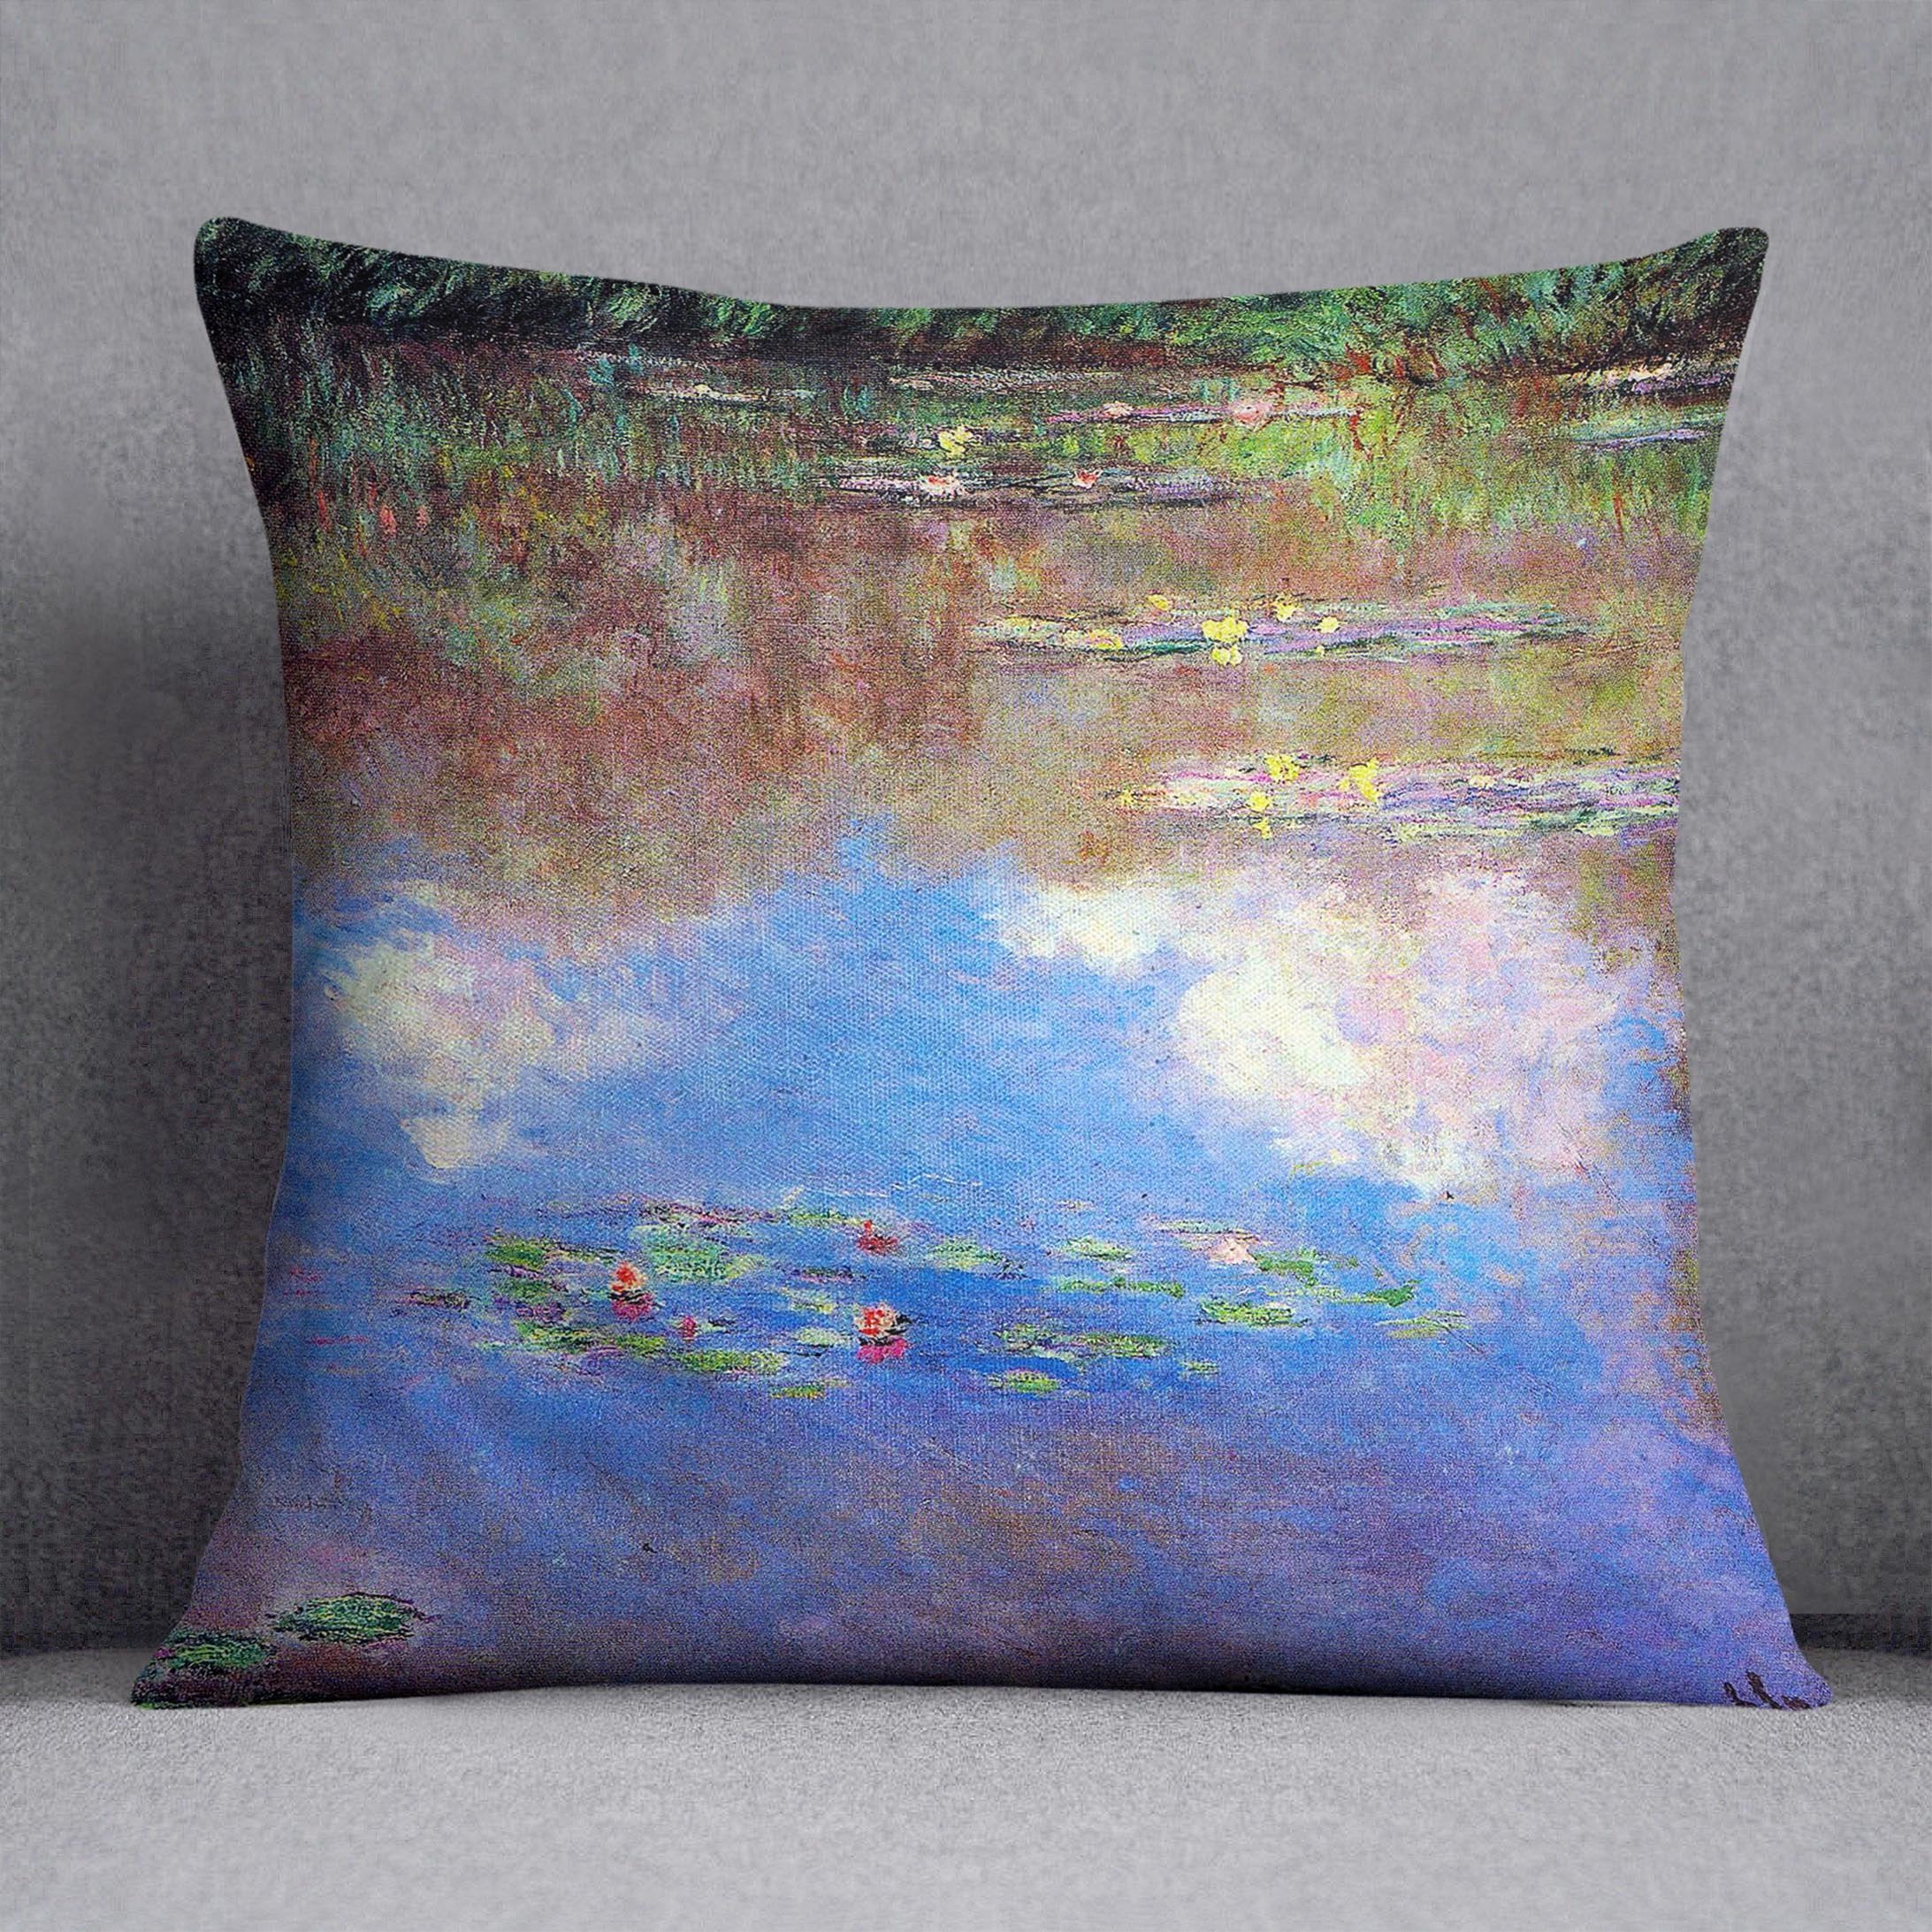 Water Lily Pond 4 by Monet Throw Pillow